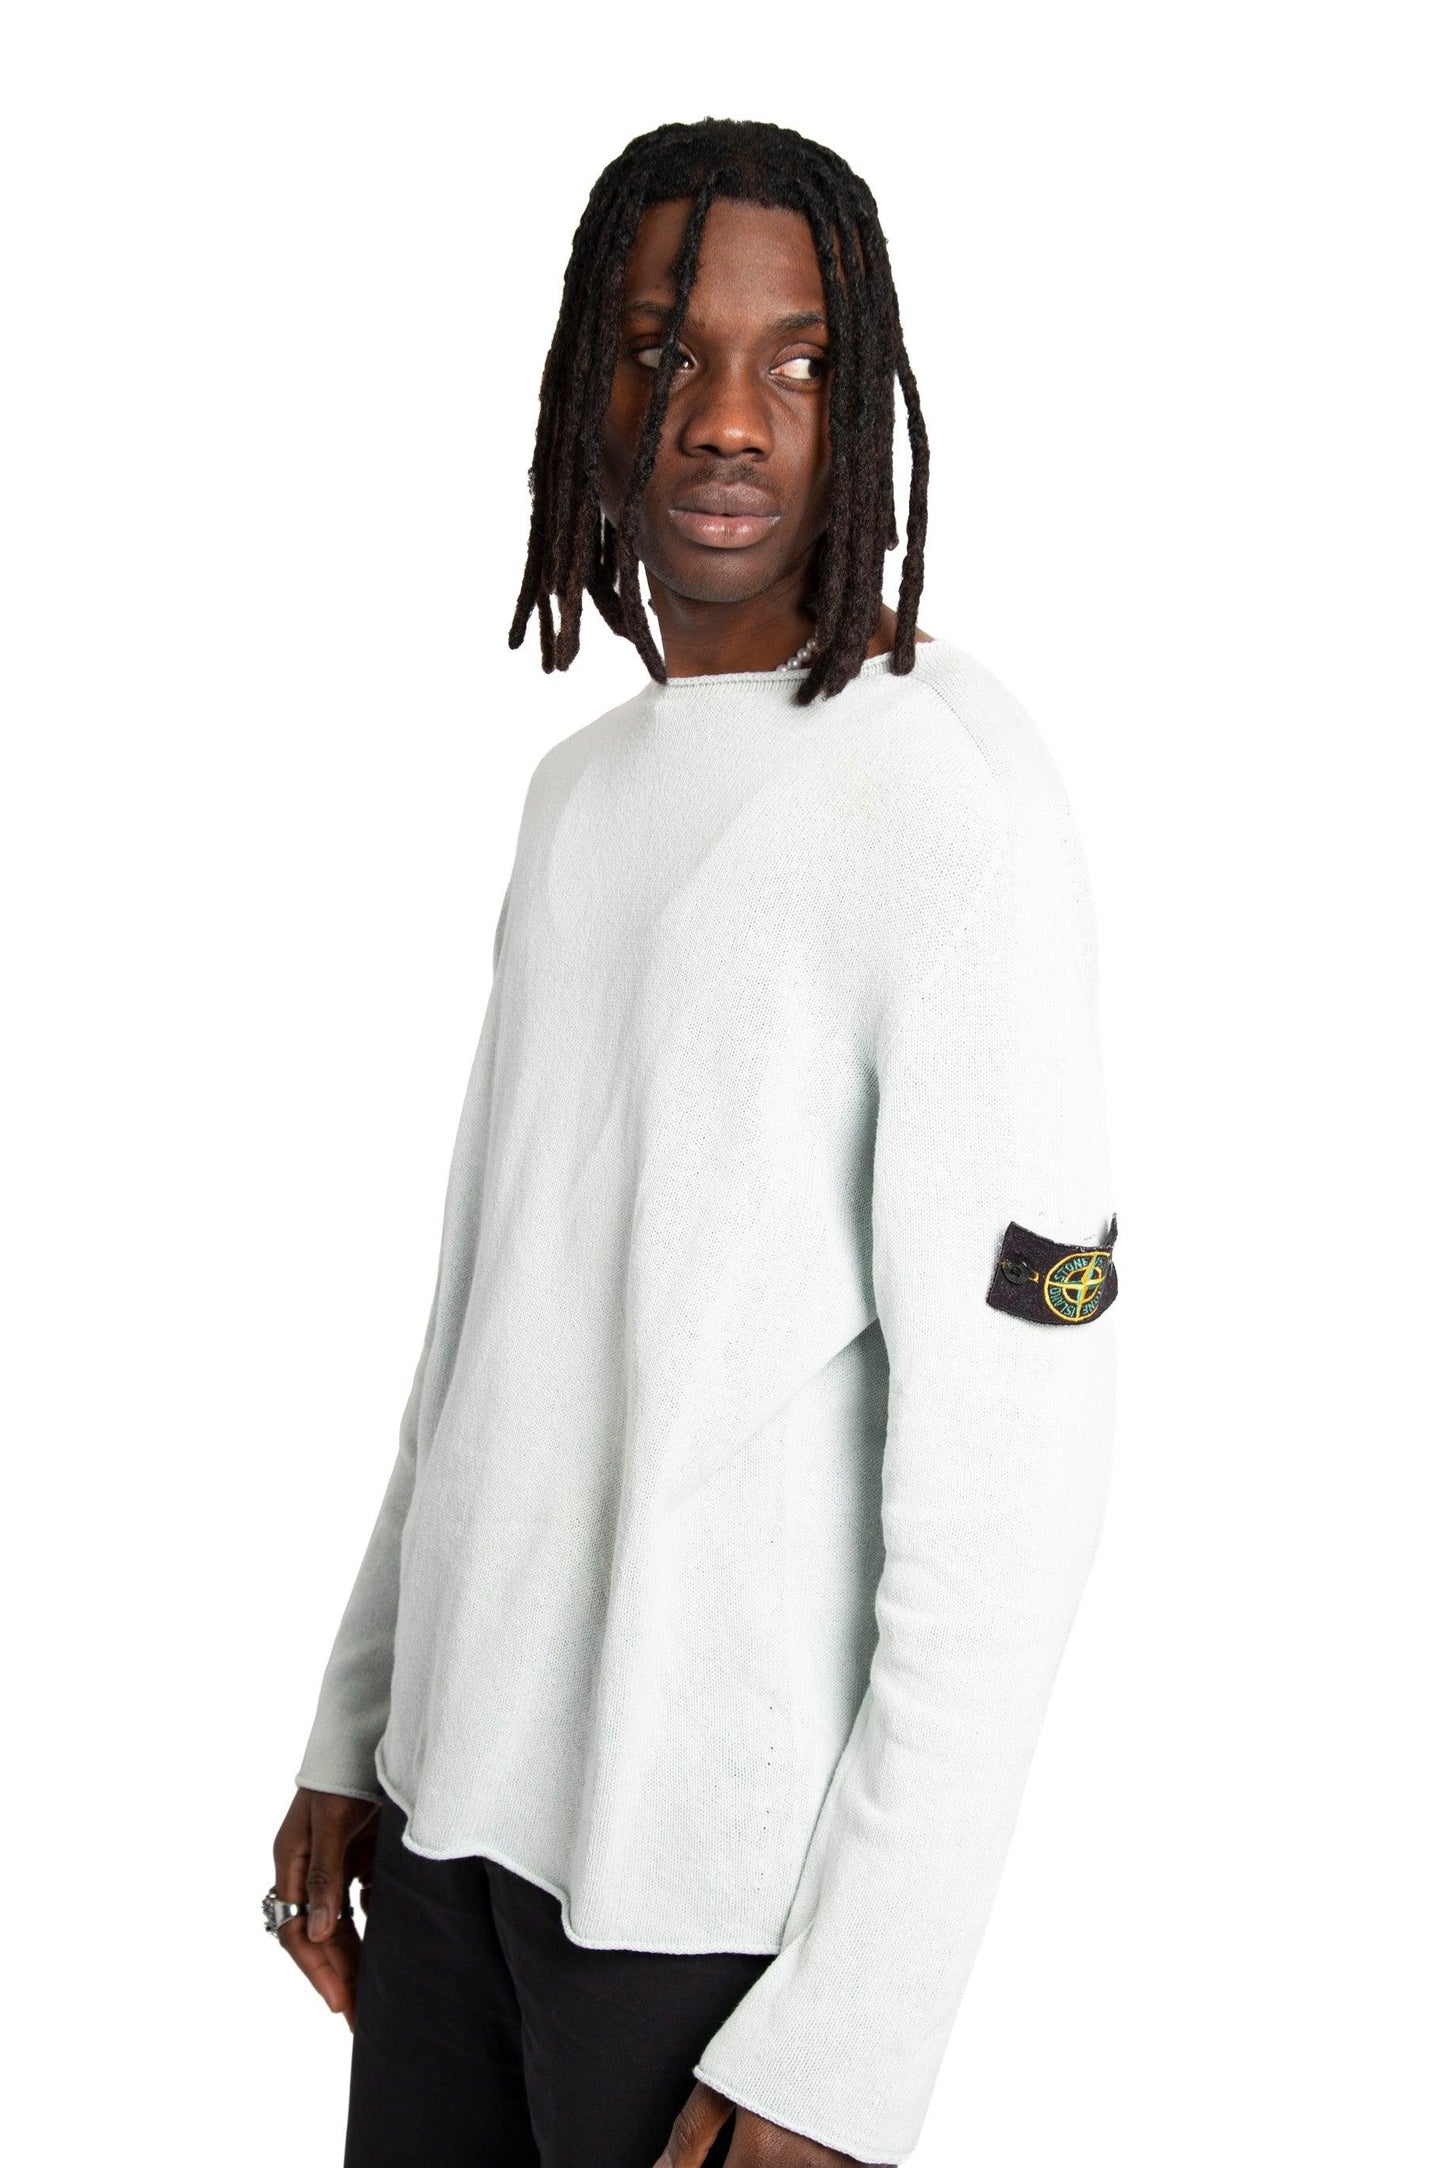 Stone Island S/S 2008 Mint Knit Sweater - Known Source